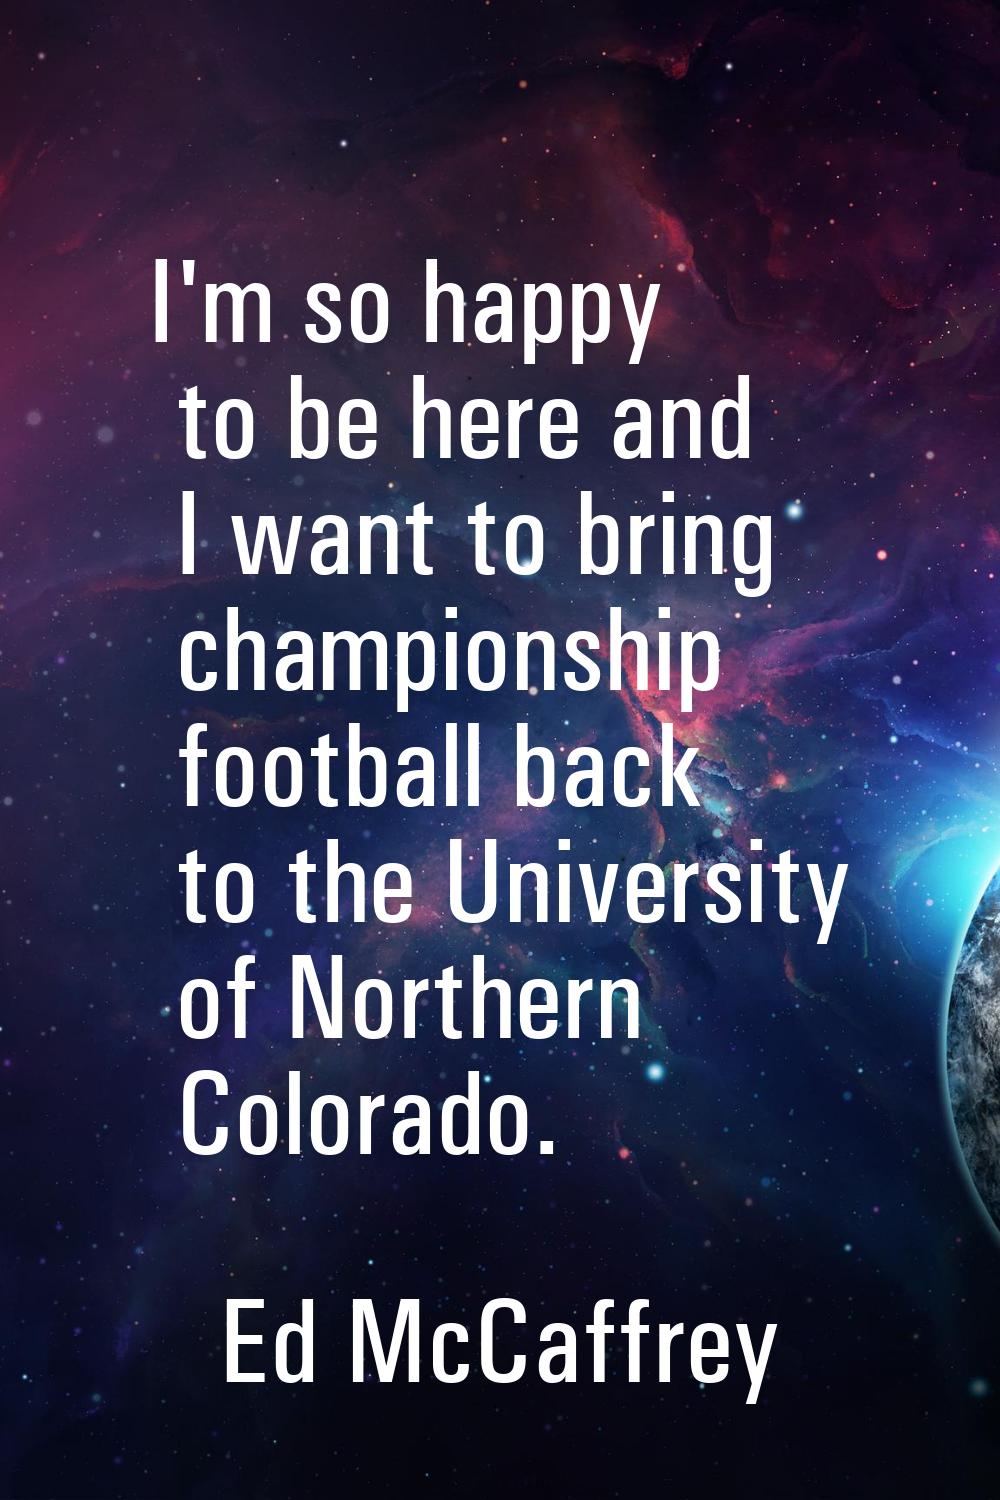 I'm so happy to be here and I want to bring championship football back to the University of Norther